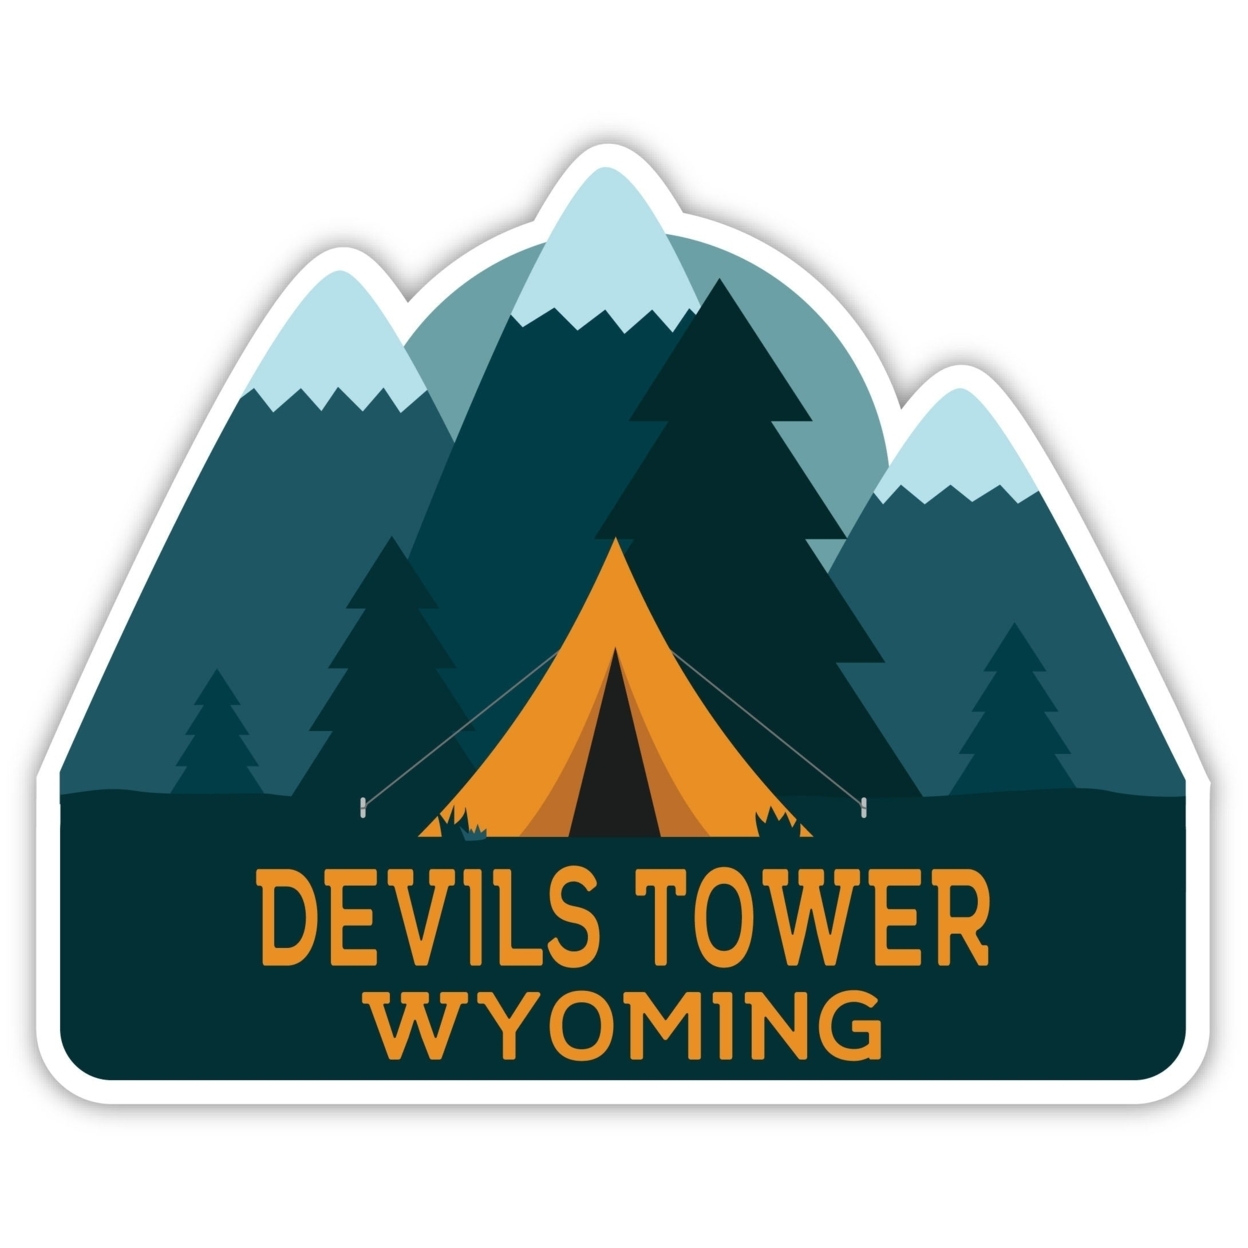 Devils Tower Wyoming Souvenir Decorative Stickers (Choose Theme And Size) - Single Unit, 10-Inch, Bear